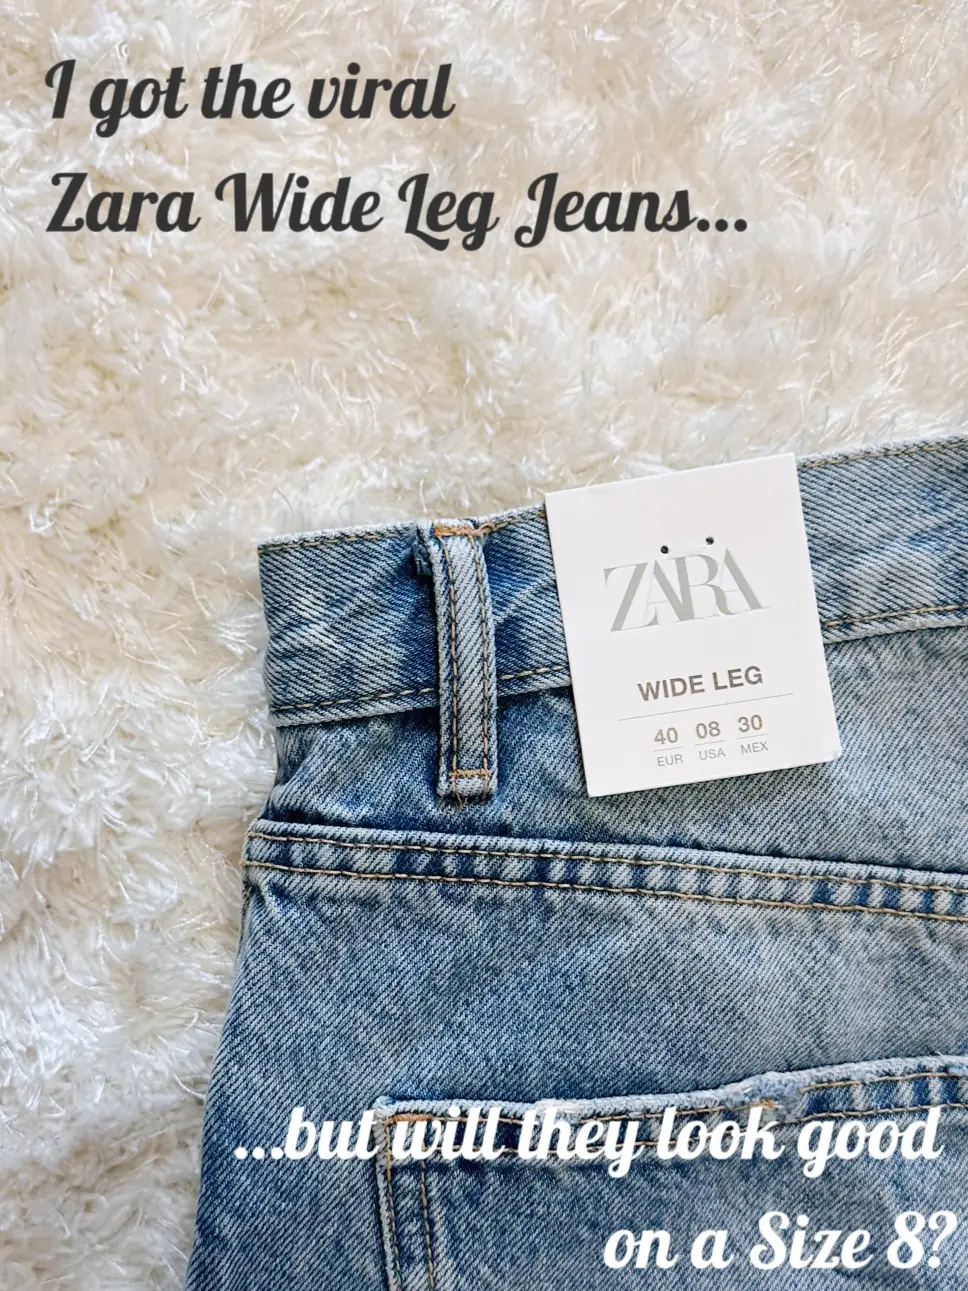 I tried on the viral gold jeans from Zara but it was a fail - they